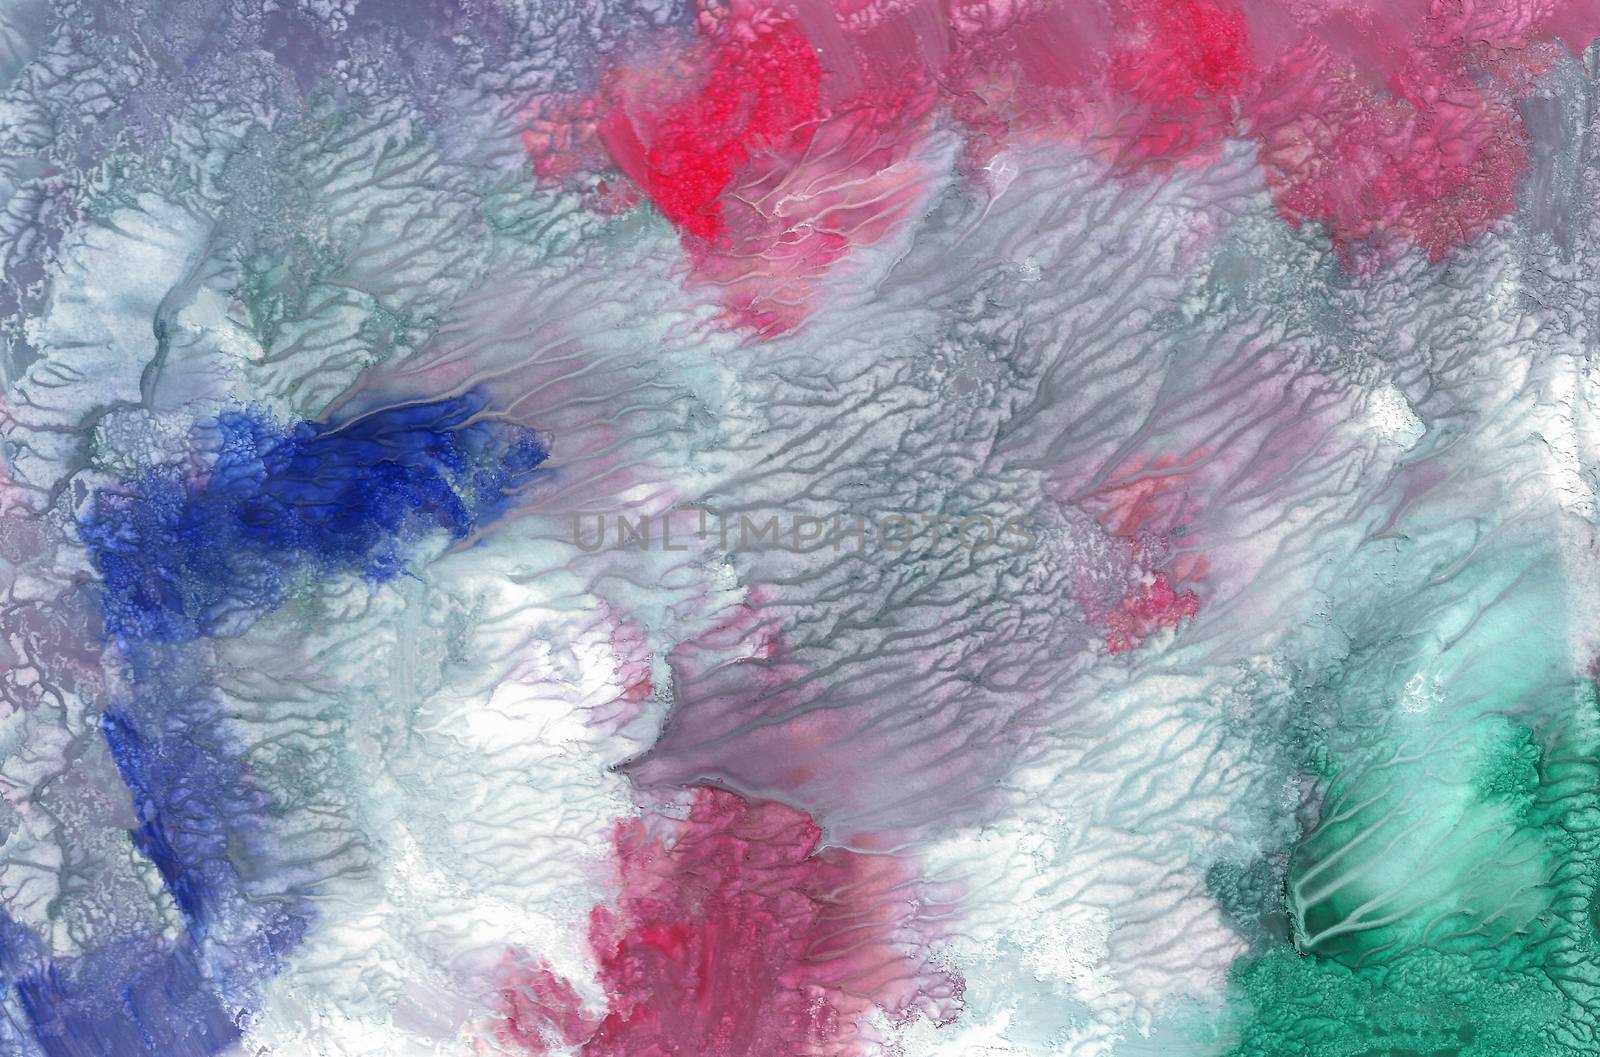 Hand-drawn texture monotype, abstract background gouache painting, paint splashes, drops, strokes in grey, blue, red , green colors. Design for backgrounds, collages, designs, titles, price tags, flyers, wallpapers, covers and packaging.